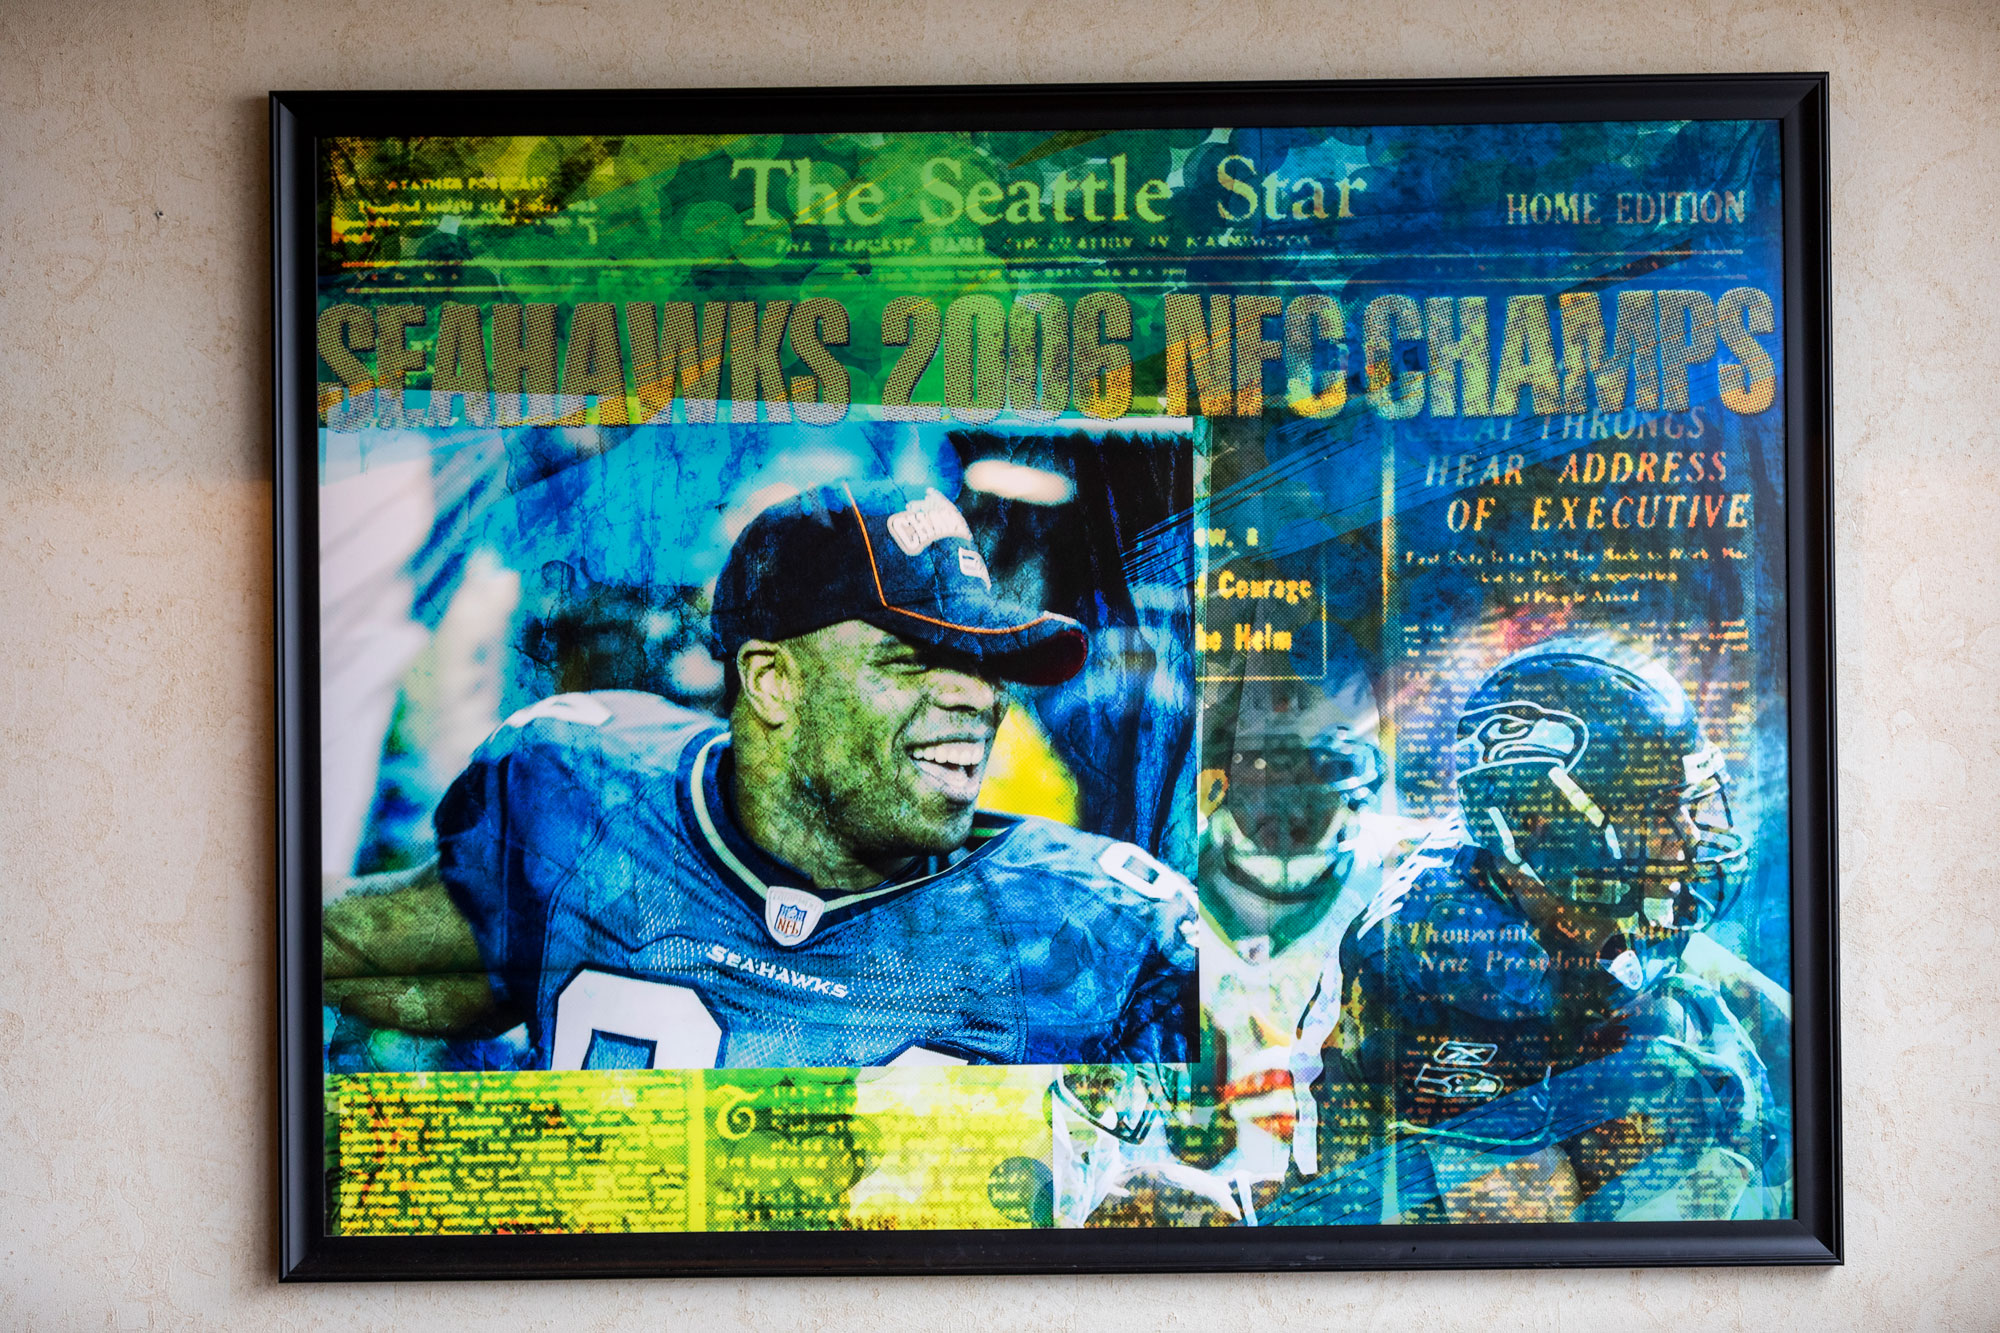 SEA Sports Page Pub Seahawks 2006 NFC Champs Framed Picture